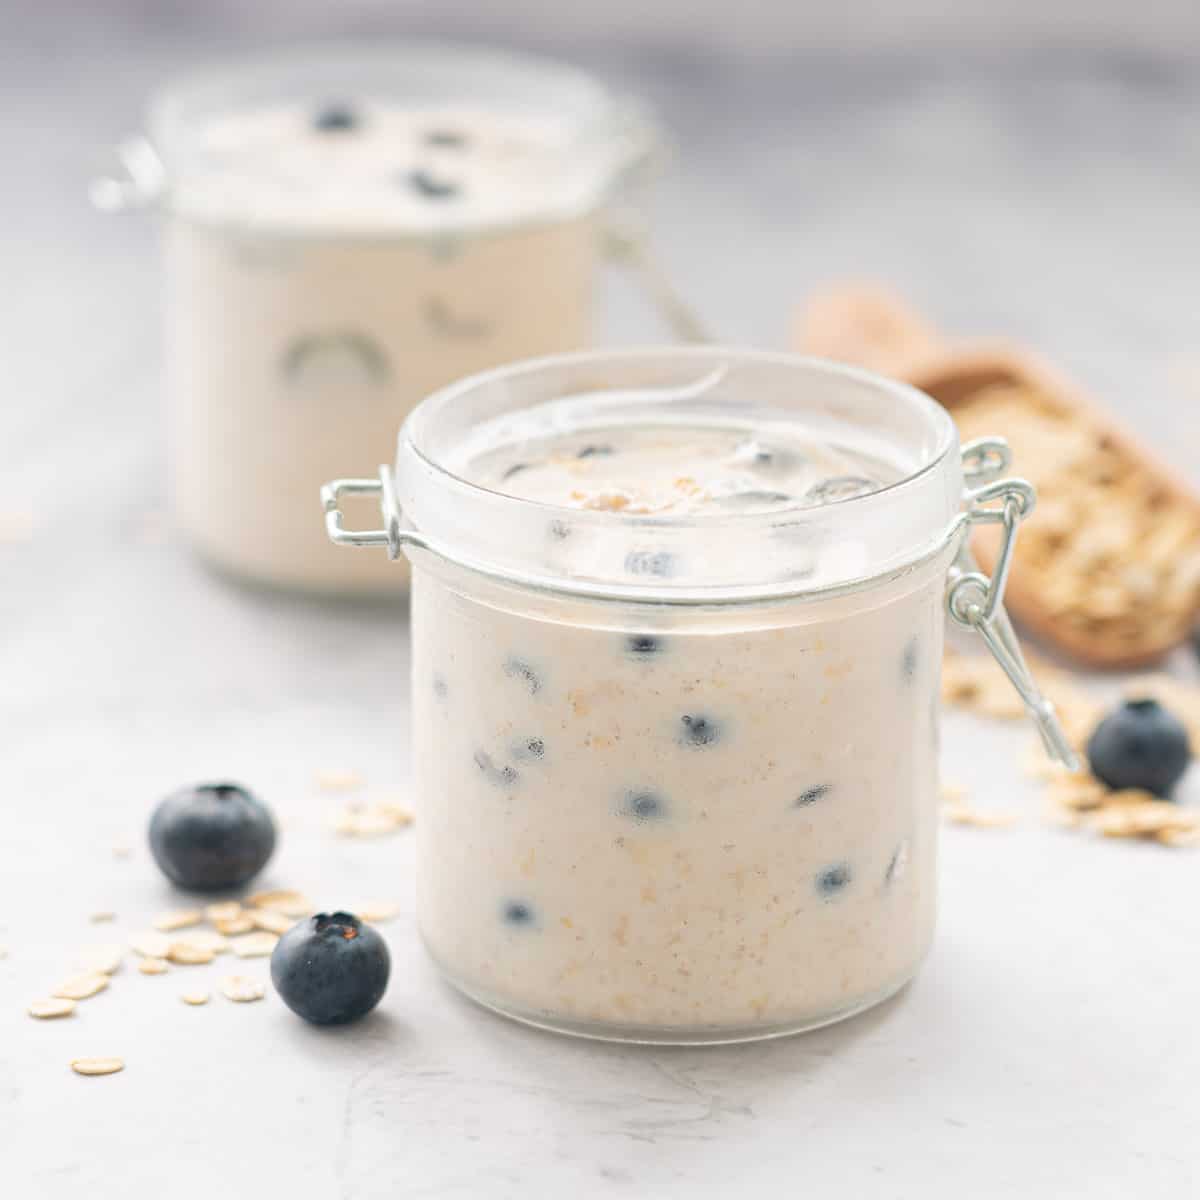 Two jars filled with Blueberry overnight oats sitting on a bench next to scattered blueberries and rolled oats 